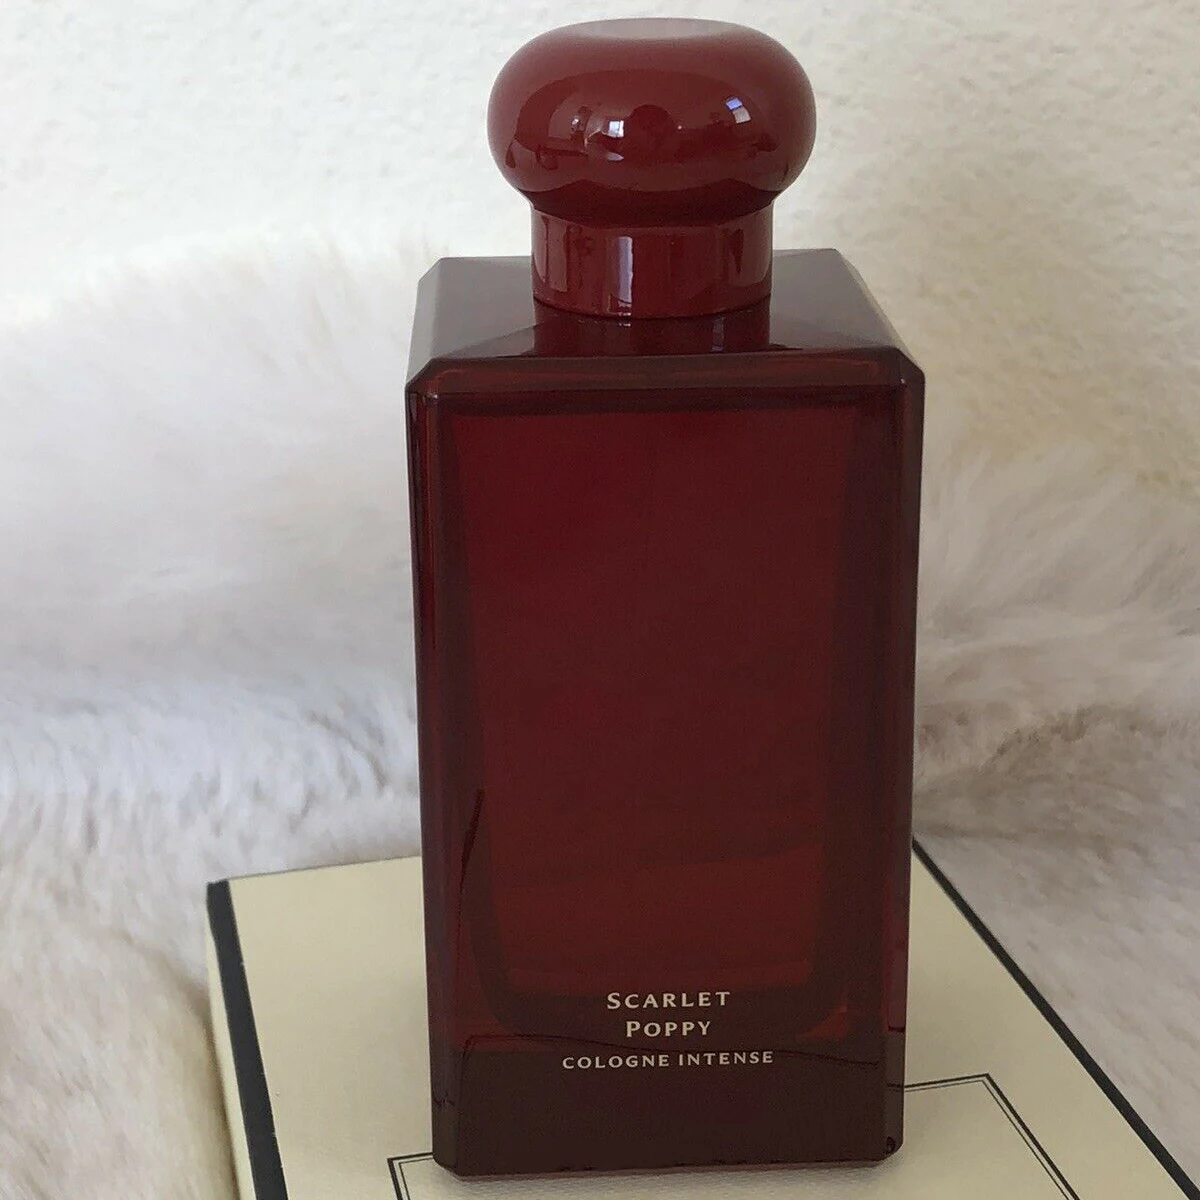 

Scarlet Poppy Cologne Intense Spray by Famous Brand Perfume Jo London Malong limited edition for women Fragrance